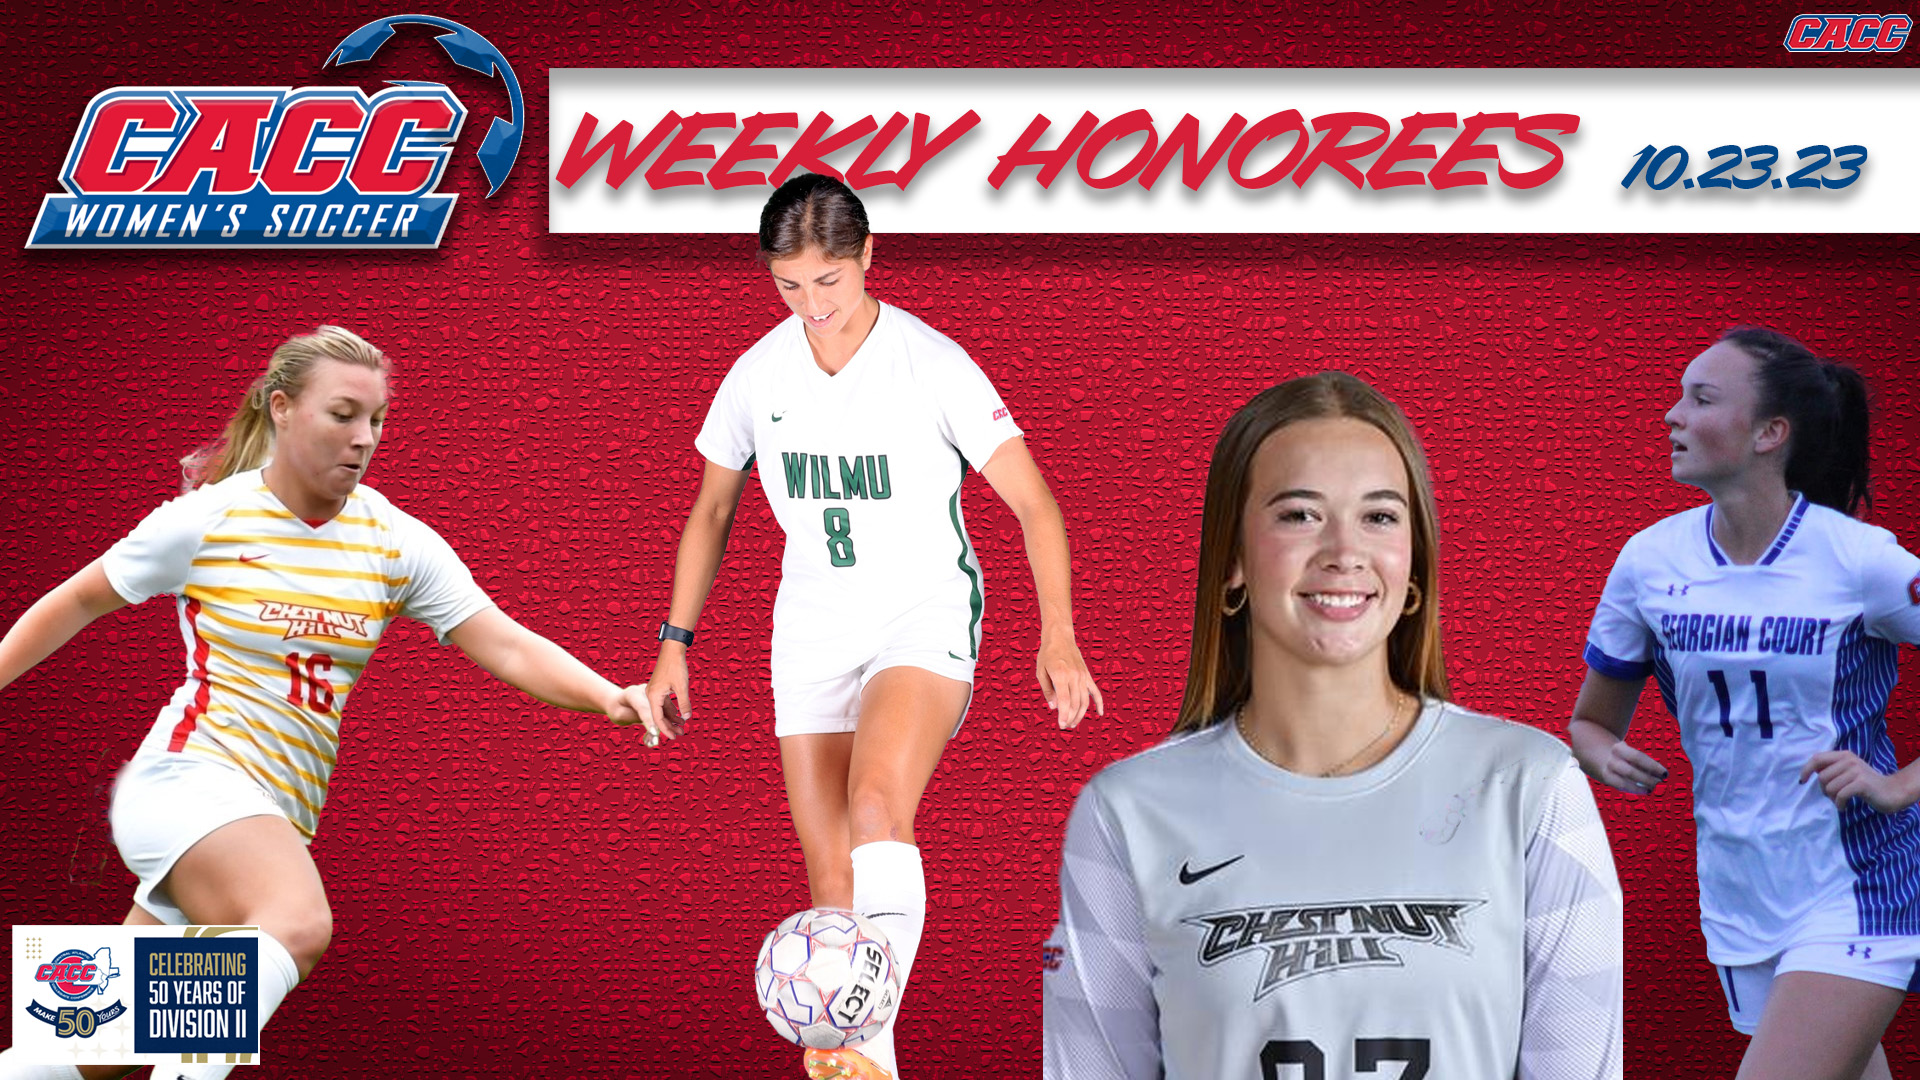 CACC Women's Soccer Weekly Honorees (10-23-23)